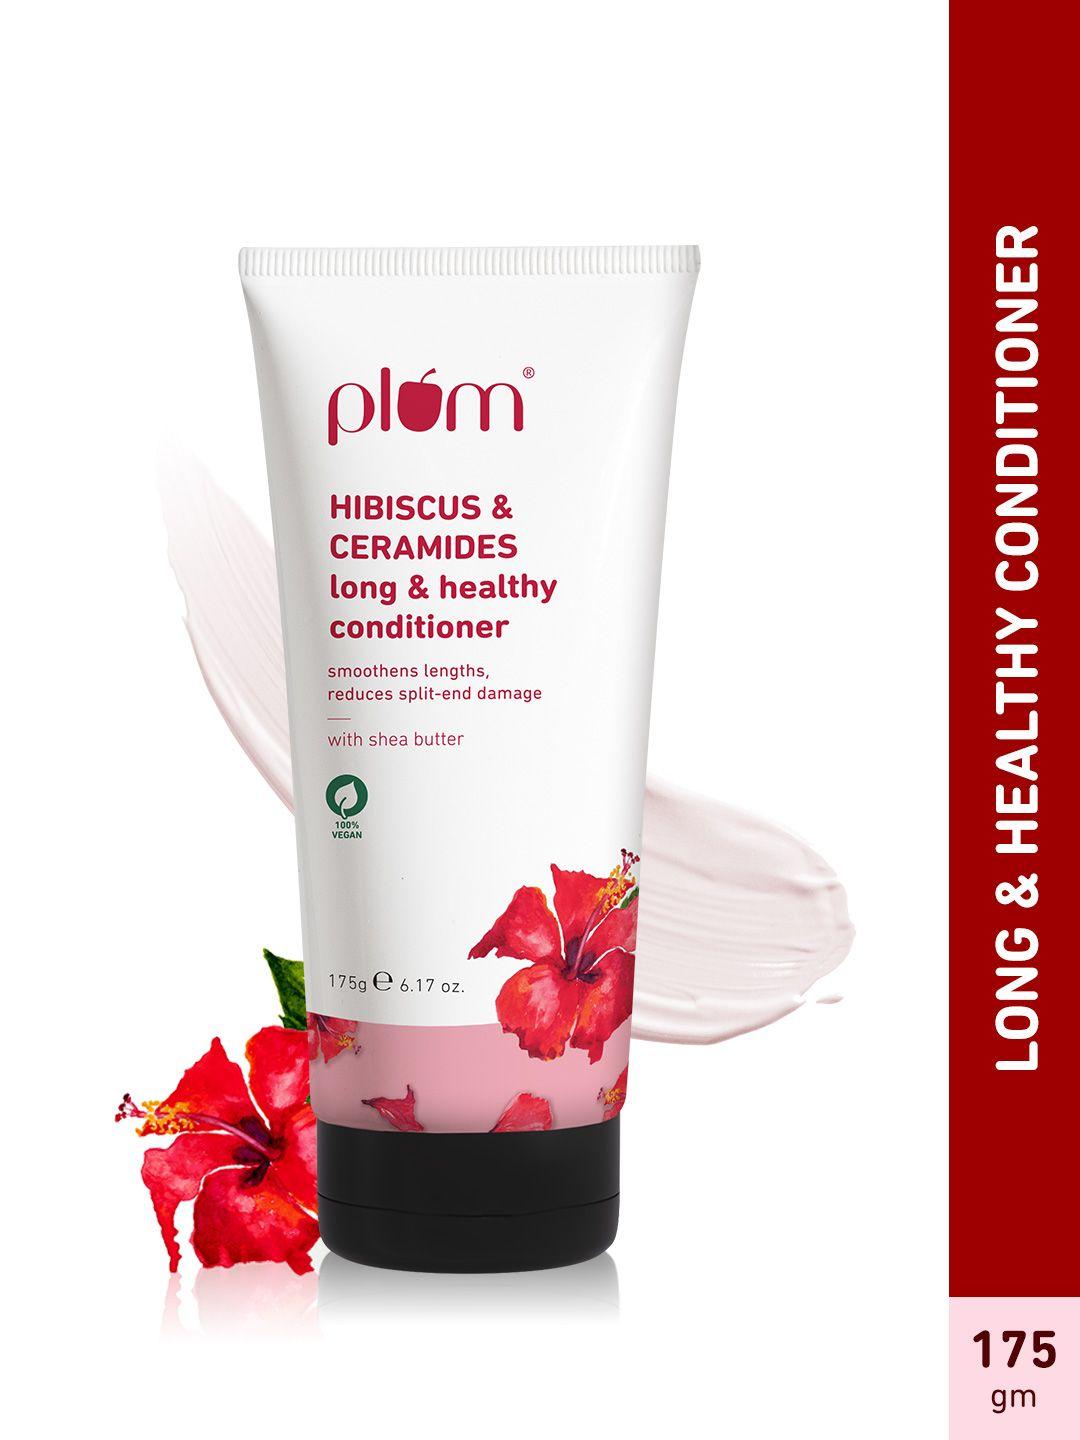 plum hibiscus & ceramides long & healthy hair conditioner with shea butter - 175g